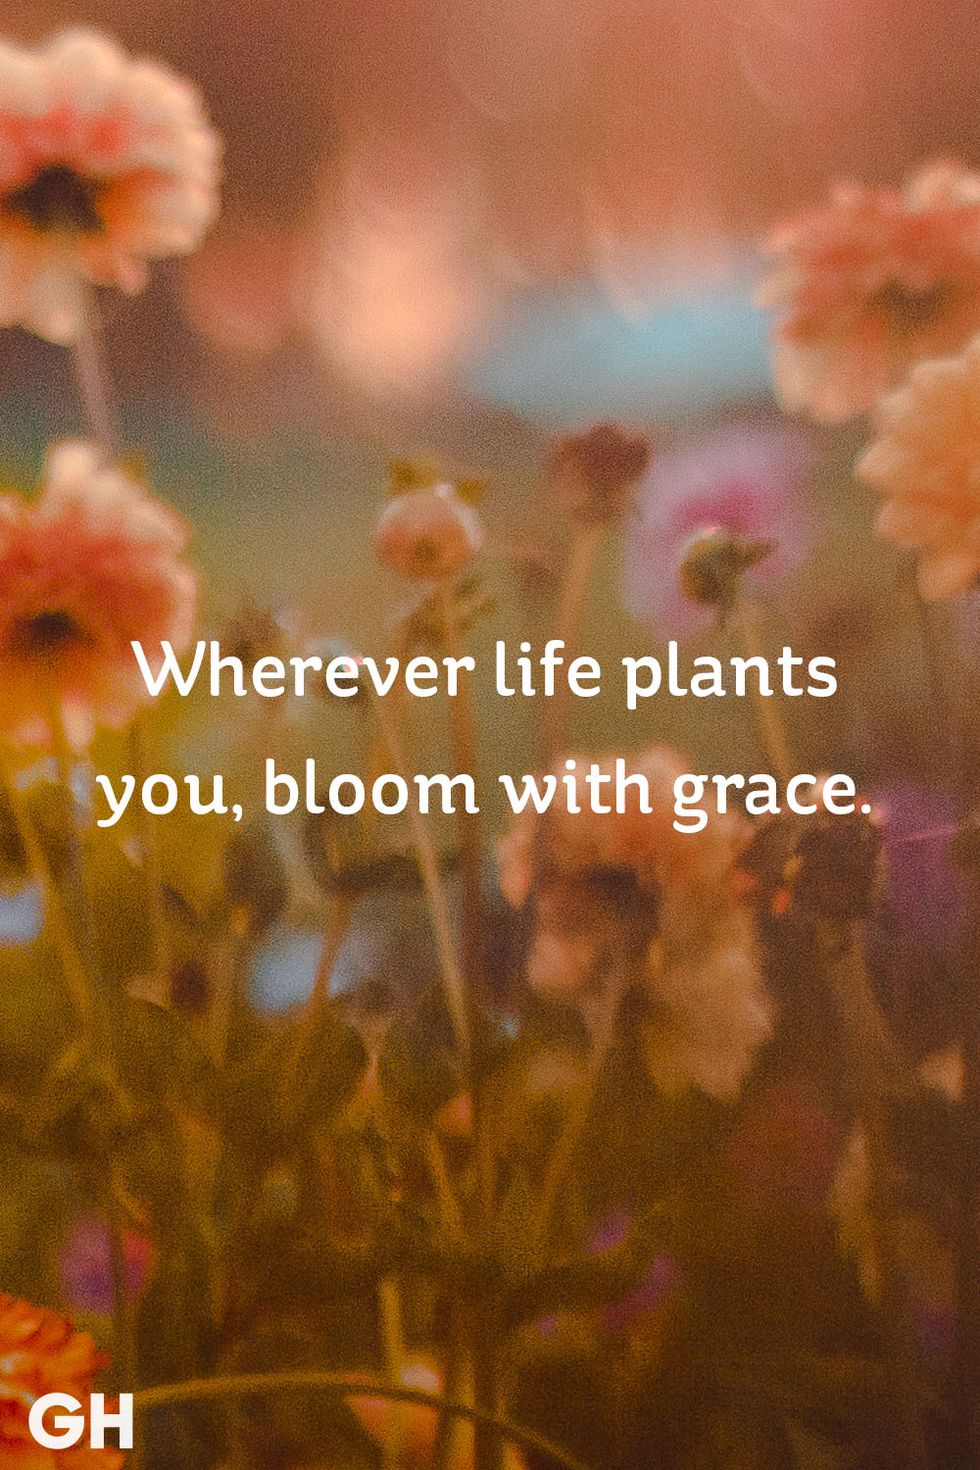 life-quotes-grace-1530194208.jpg?crop=1xw:1xh;center,top&resize=980:*